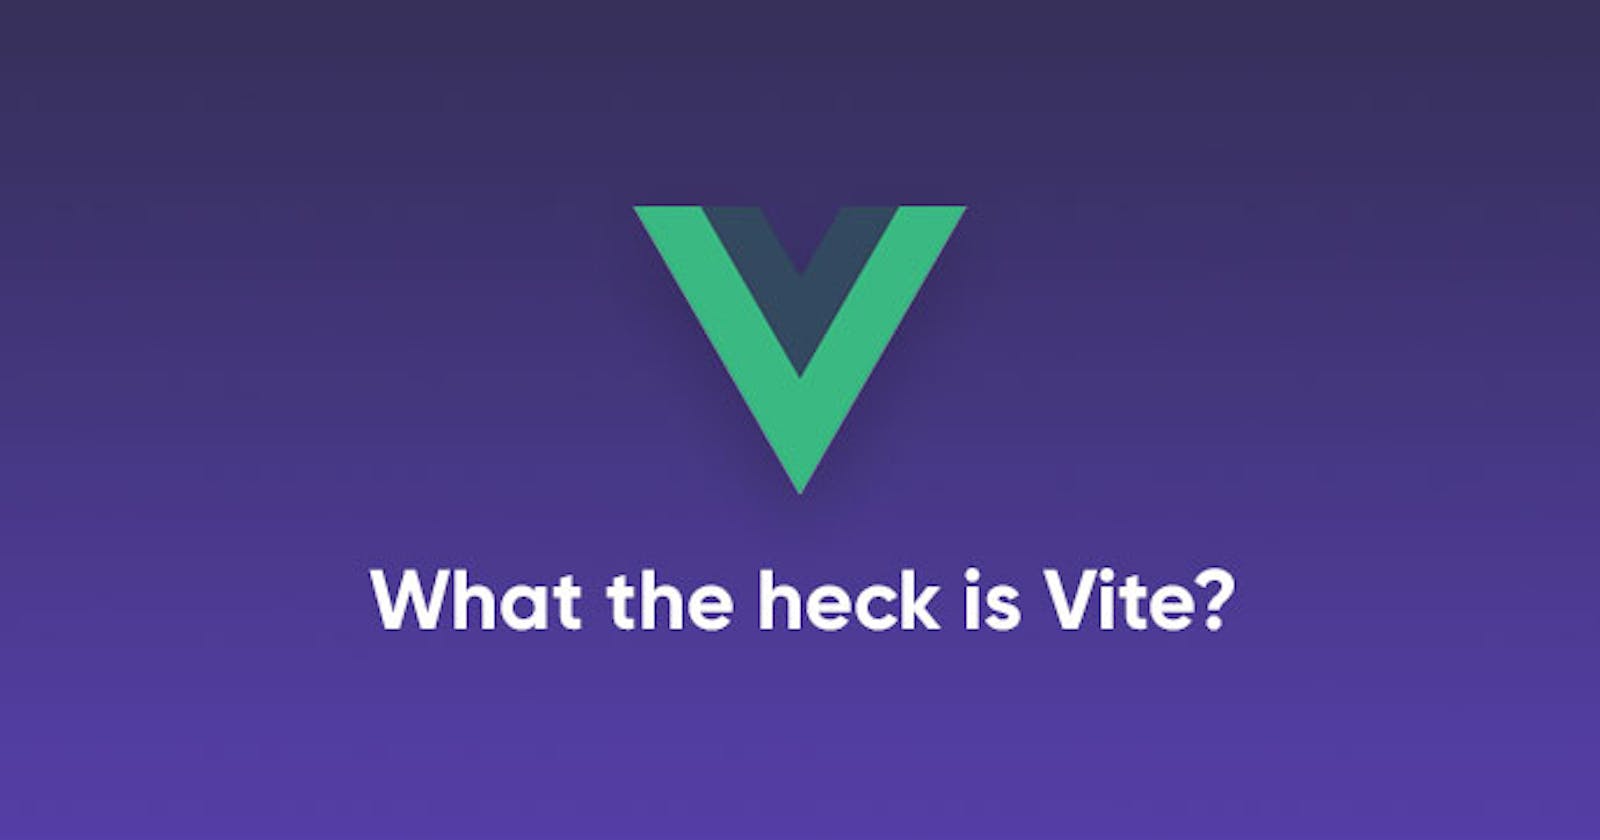 What the heck is Vue Vite?